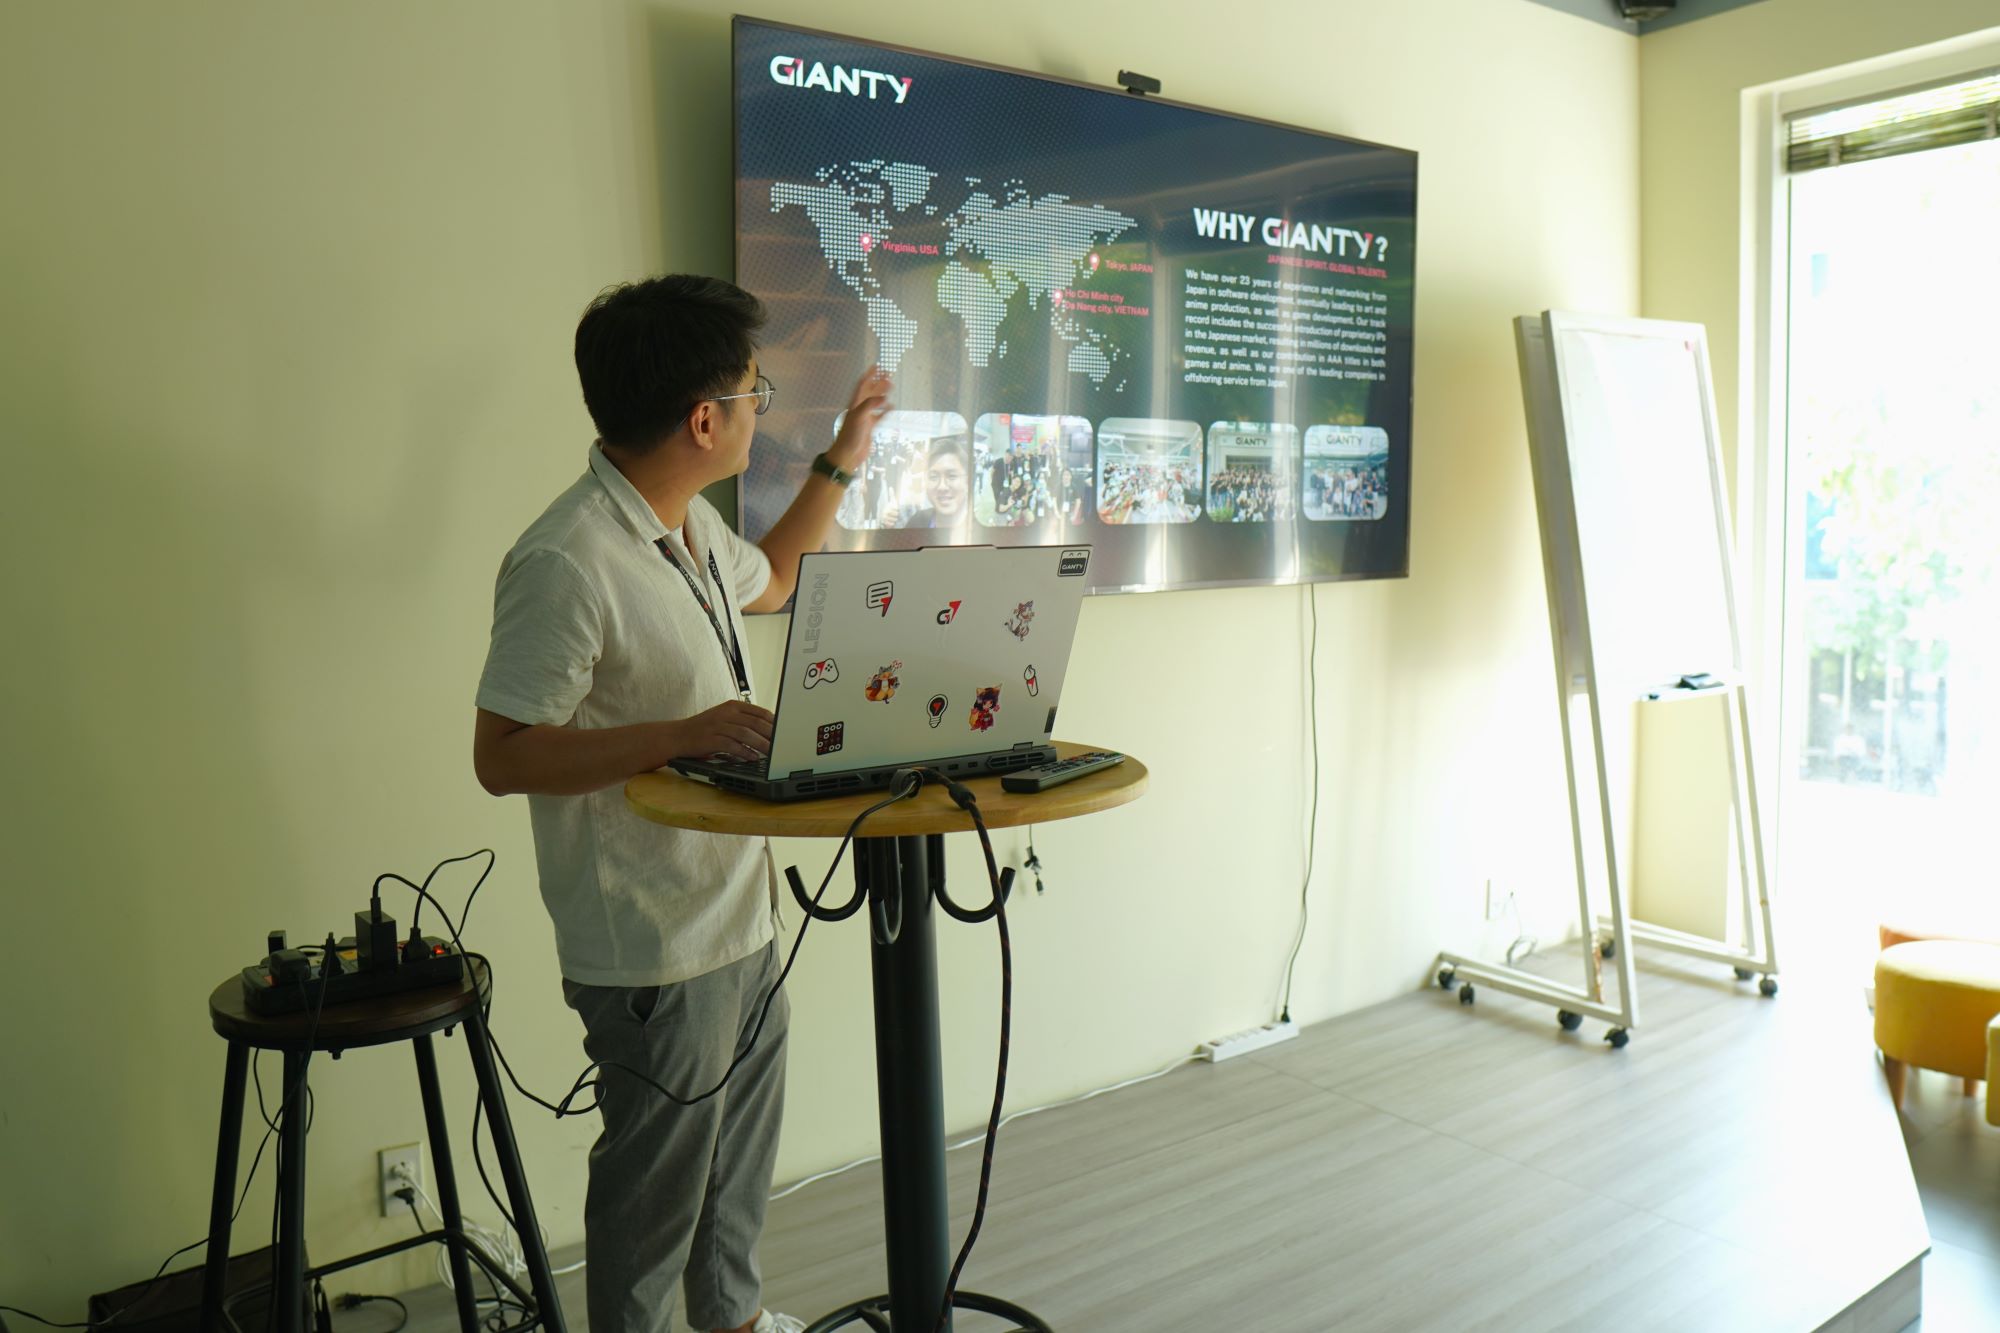 Mr. Brian Nguyen - Head of Marketing at GIANTY shared interesting insights about the game market